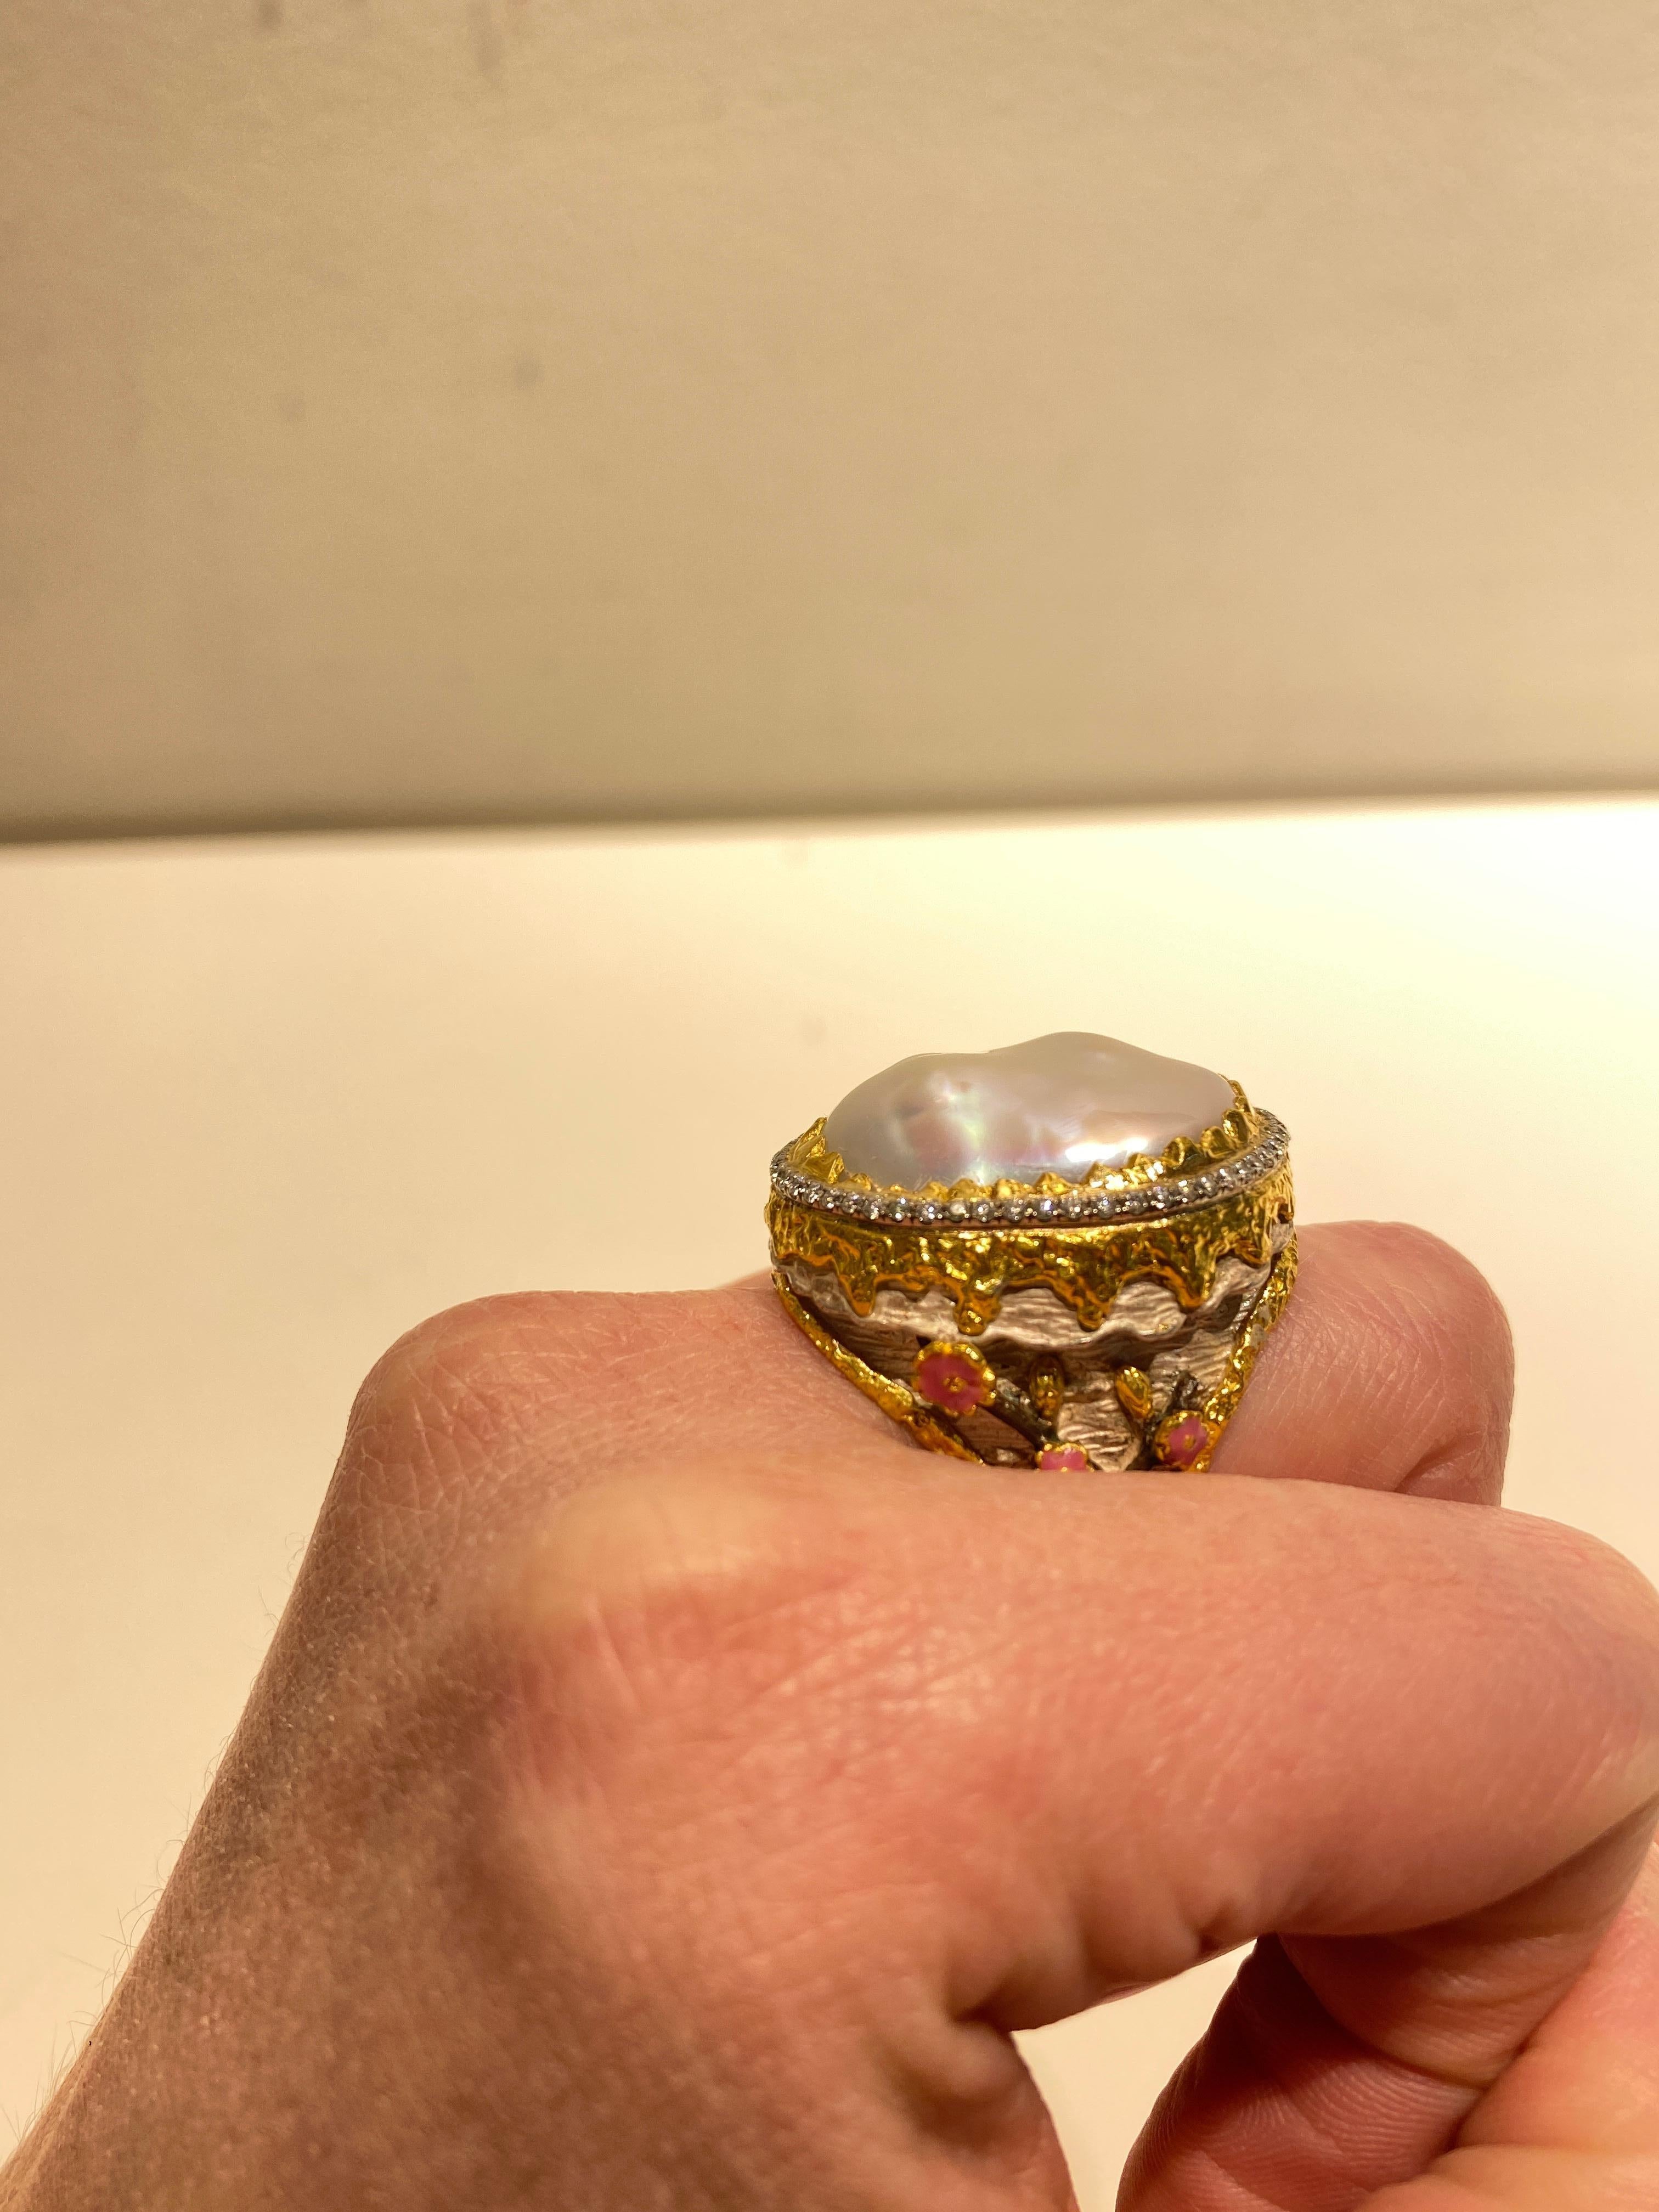 Uncut Victor Velyan Cherry Blossom Pearl Ring with White Diamonds in 24K Yellow Gold